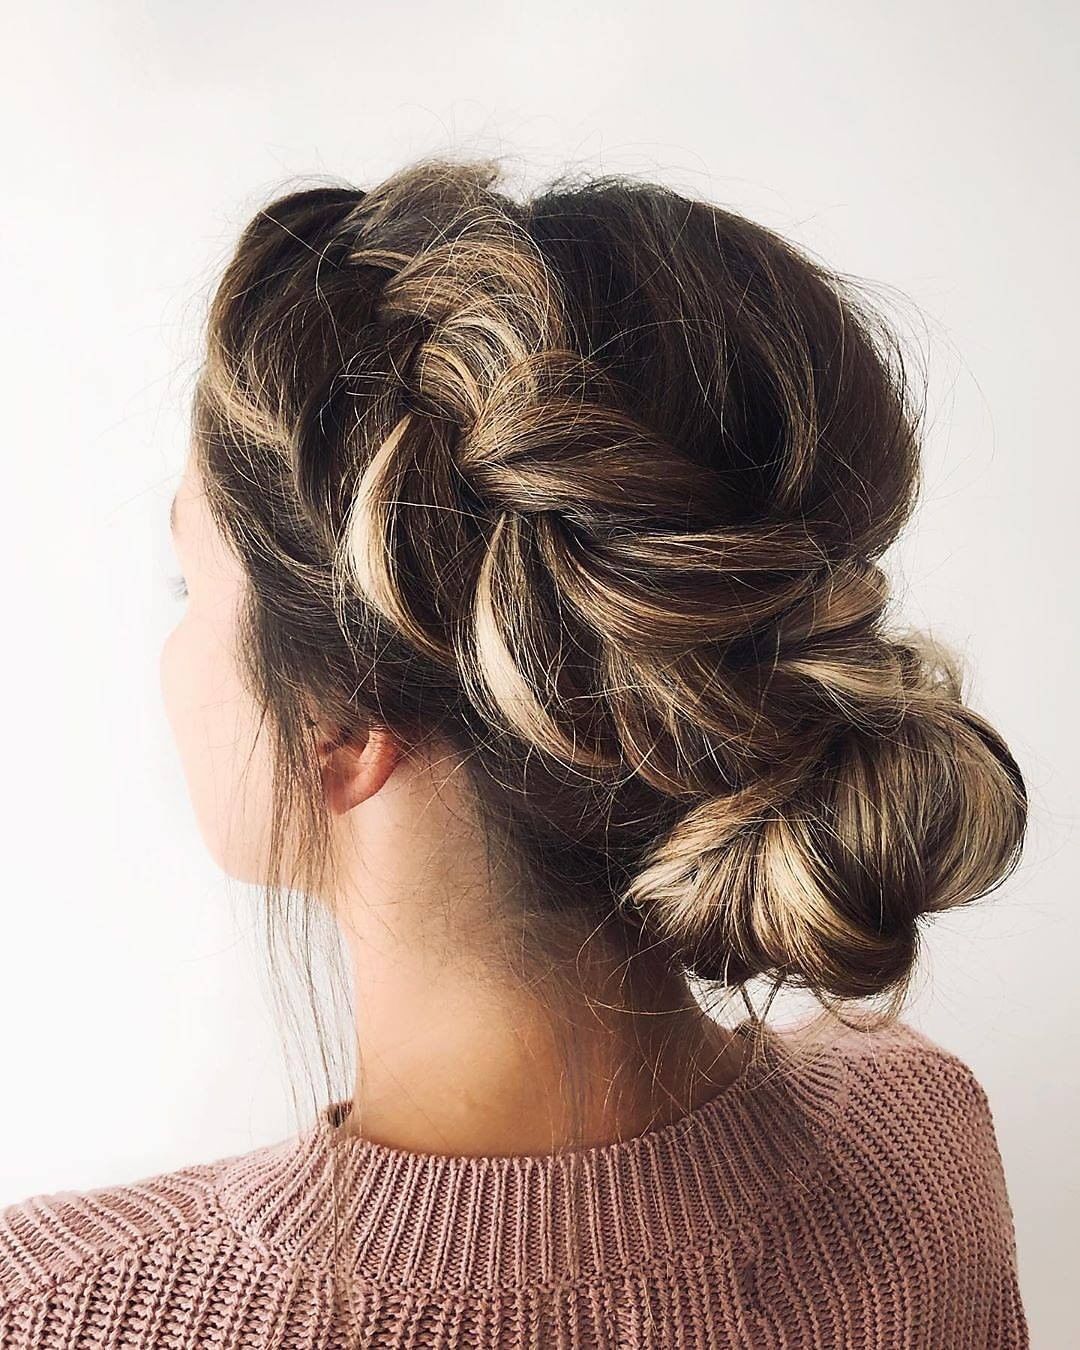 Schwarzkopf Professional - How INCREDIBLE is this textured bun!? 😍
👉 @laurascheffers_hairstylist.mu used #OSiS Dust It for incredible volume – plus a little spritz of SILHOUETTE Super Hold Hairspray t...